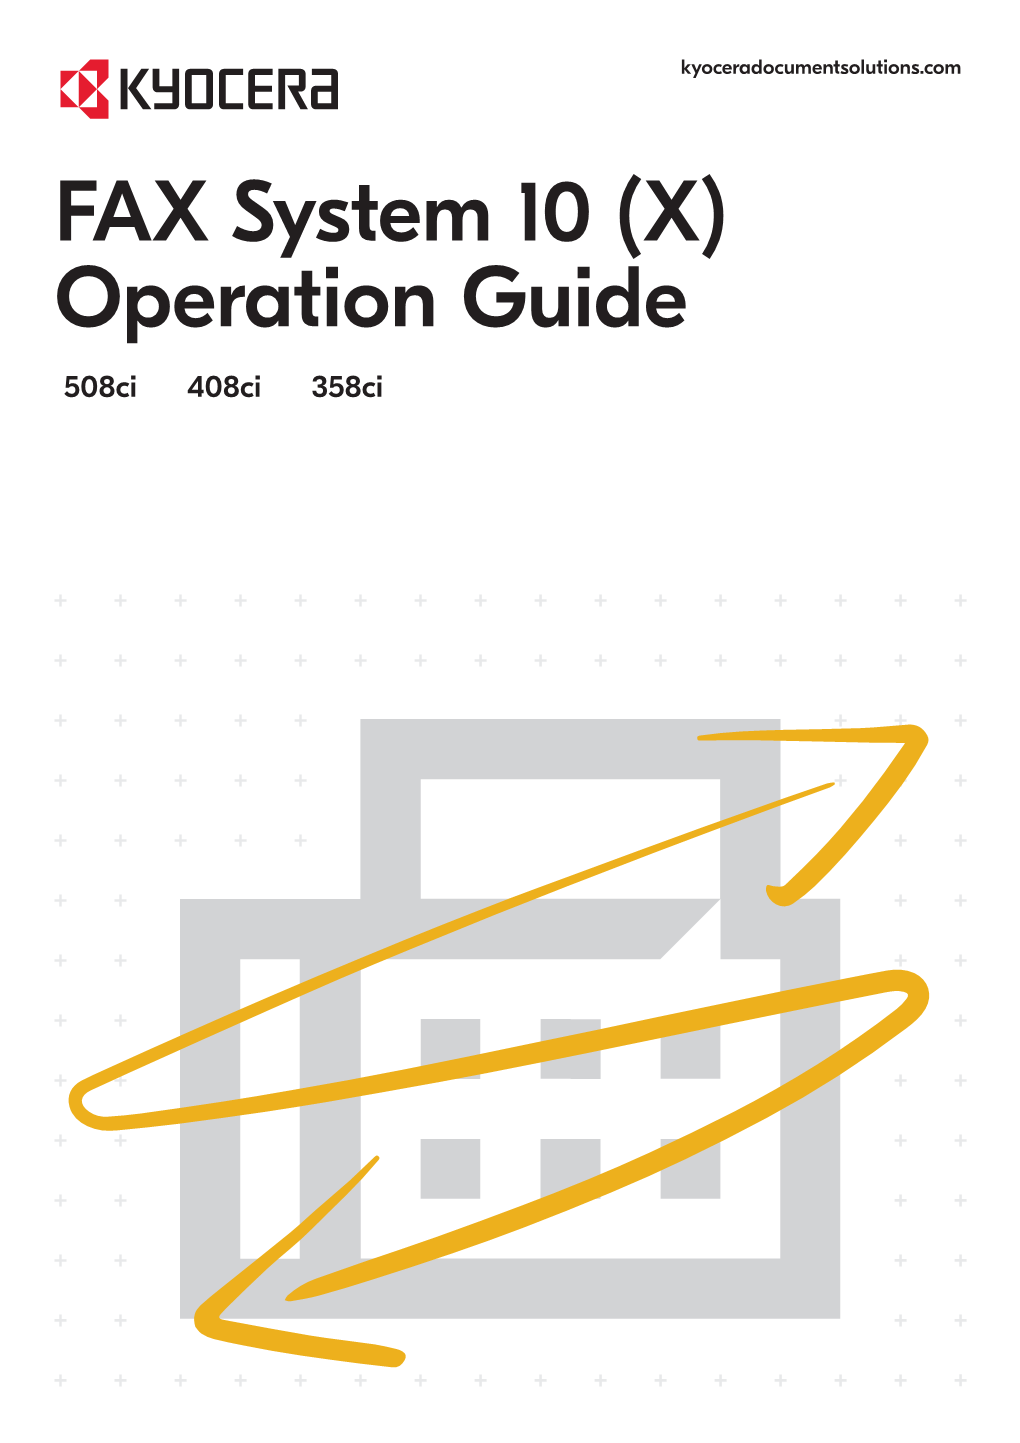 FAX System 10 (X) Operation Guide